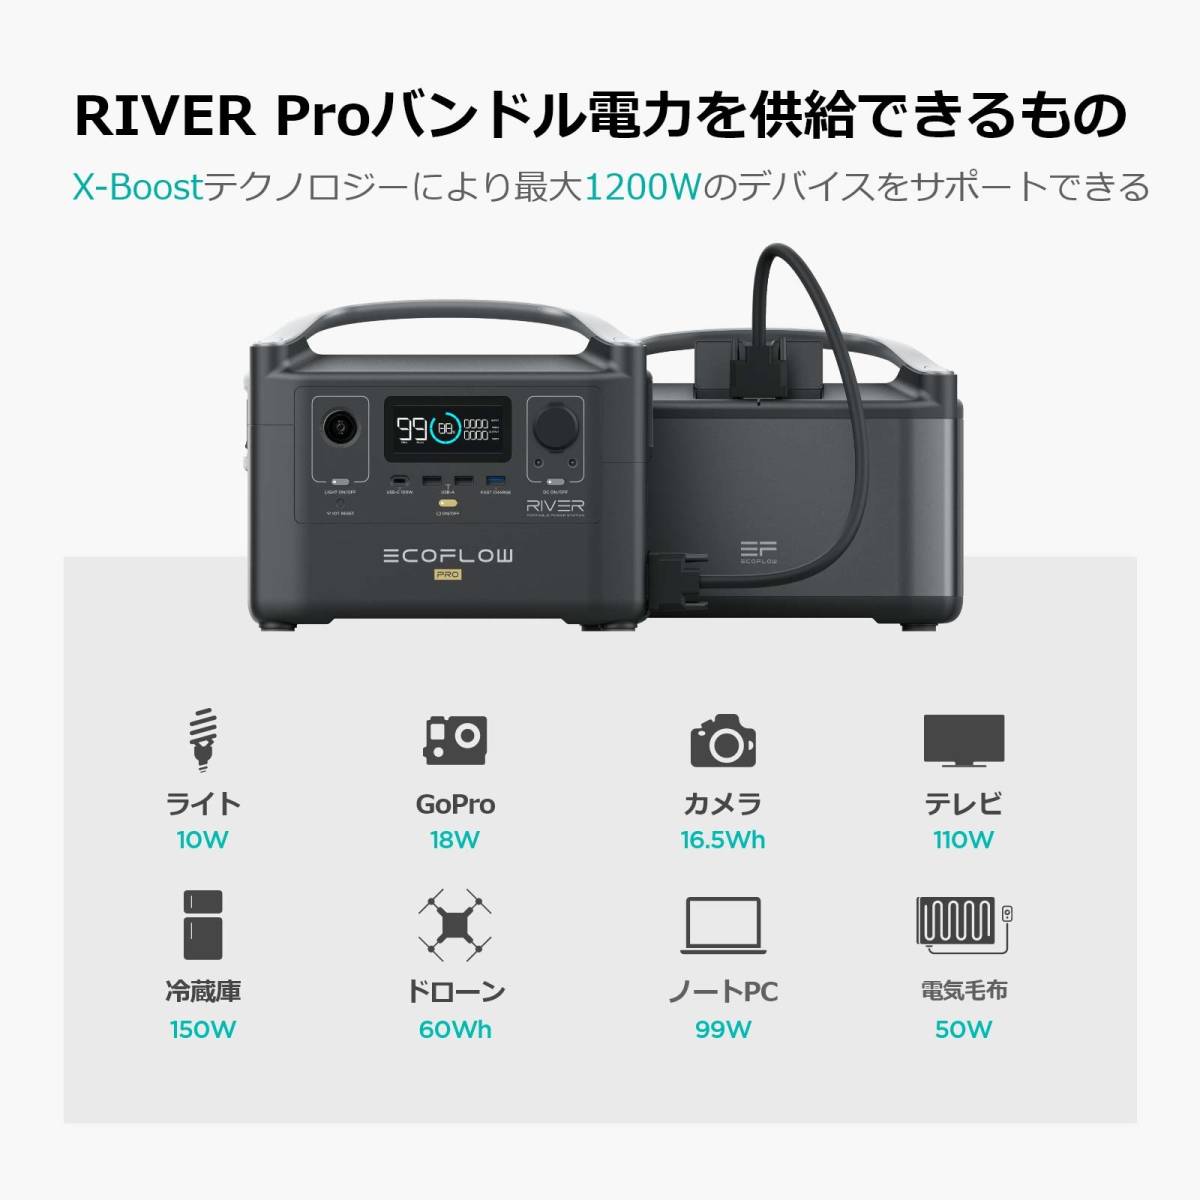 EcoFlow ポータブル電源 RIVER Pro専用容量拡張バッテリー 720Wh 付け替え簡単 RIVER Proポータブル電源(720Wh)と接続容量を倍増(1440Wh)に_画像4